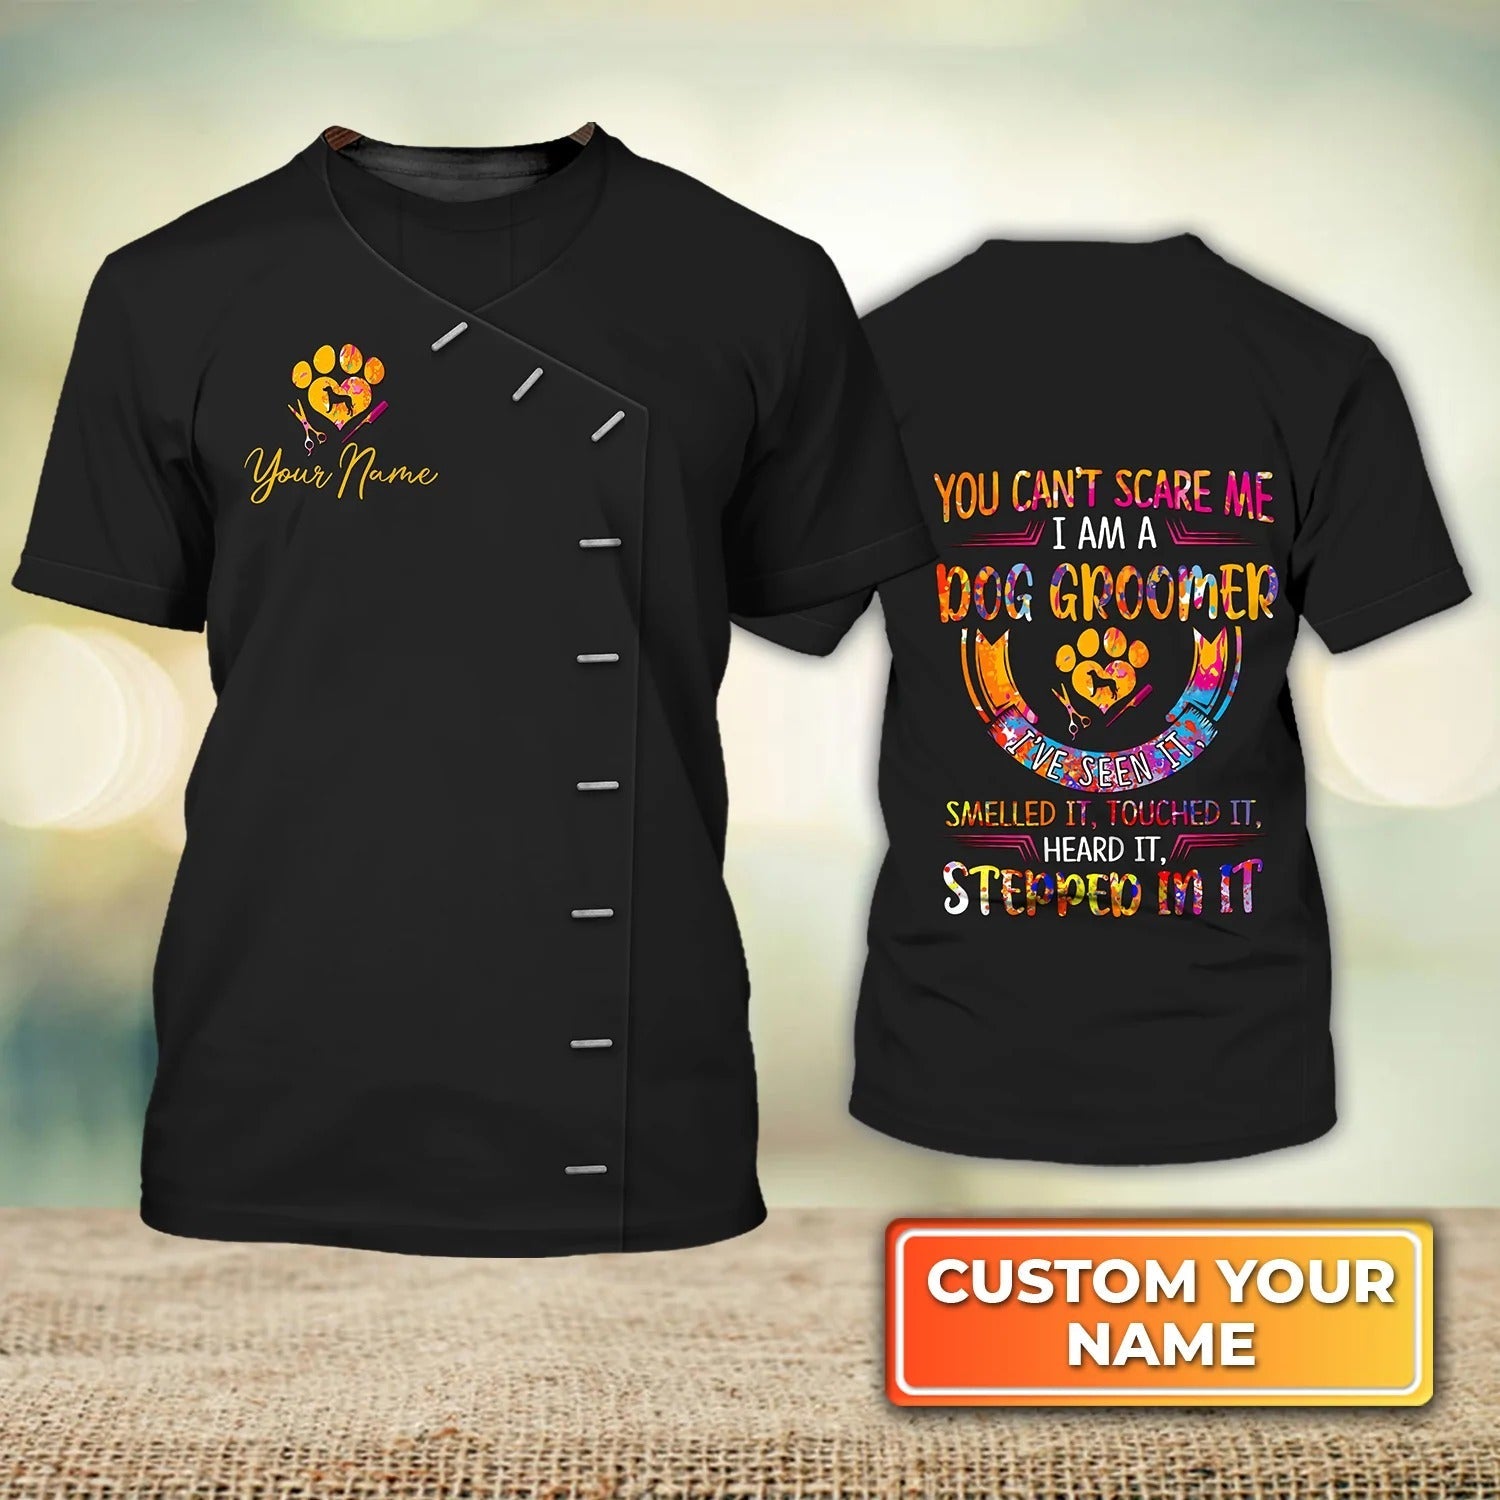 Personalized Dog Groomer 3D T Shirt You Can’t Scare Me I Am A Groomer Dog Groomer Pet Groomer Uniform